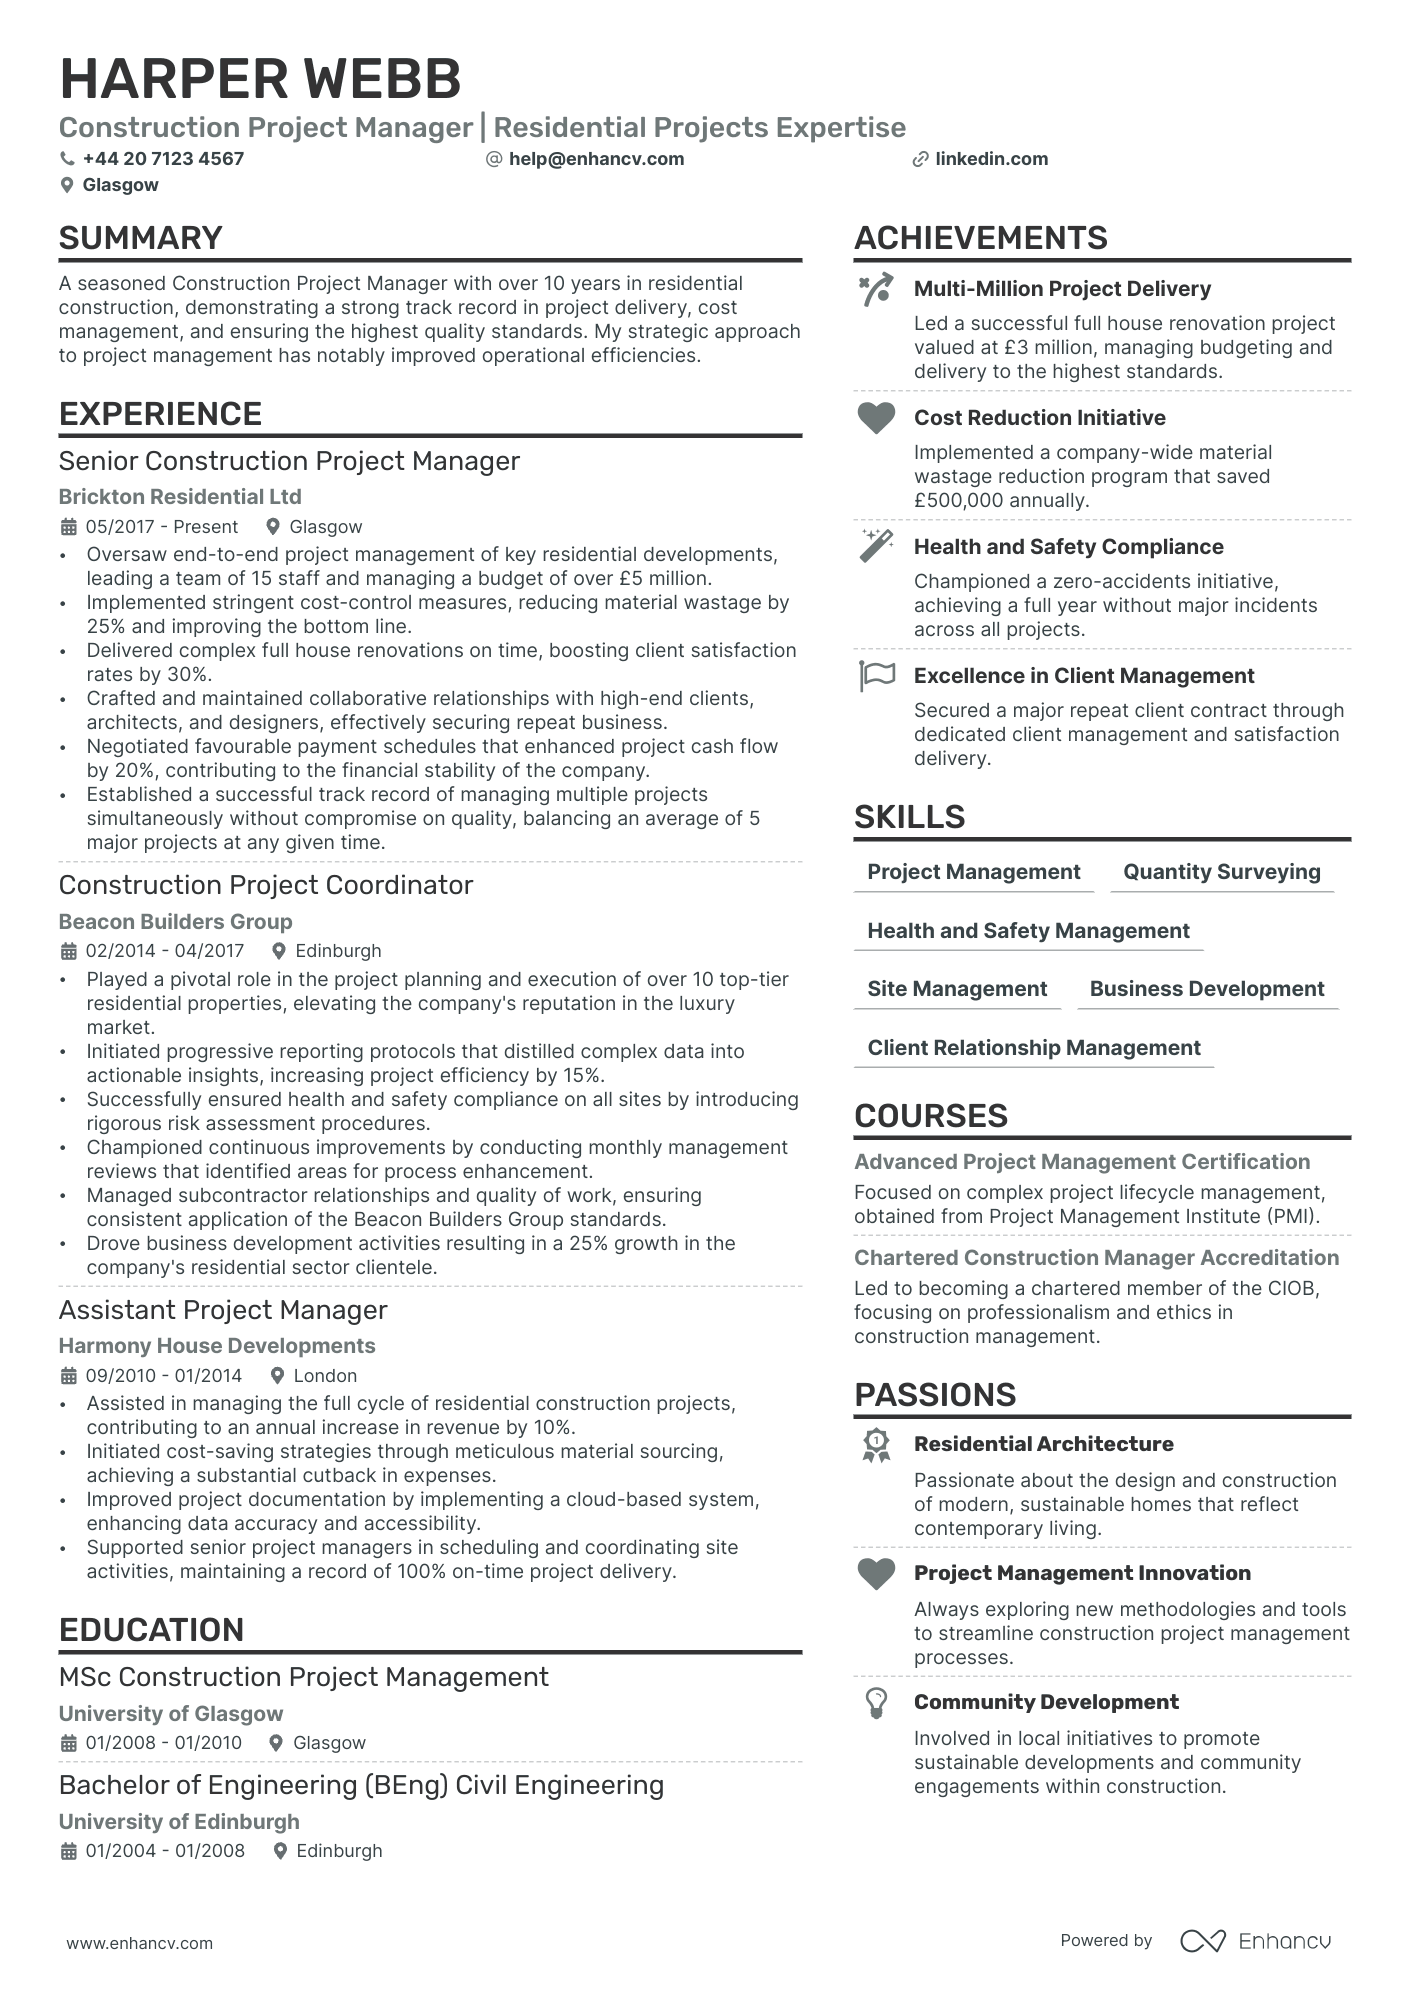 Construction Project Manager cv example